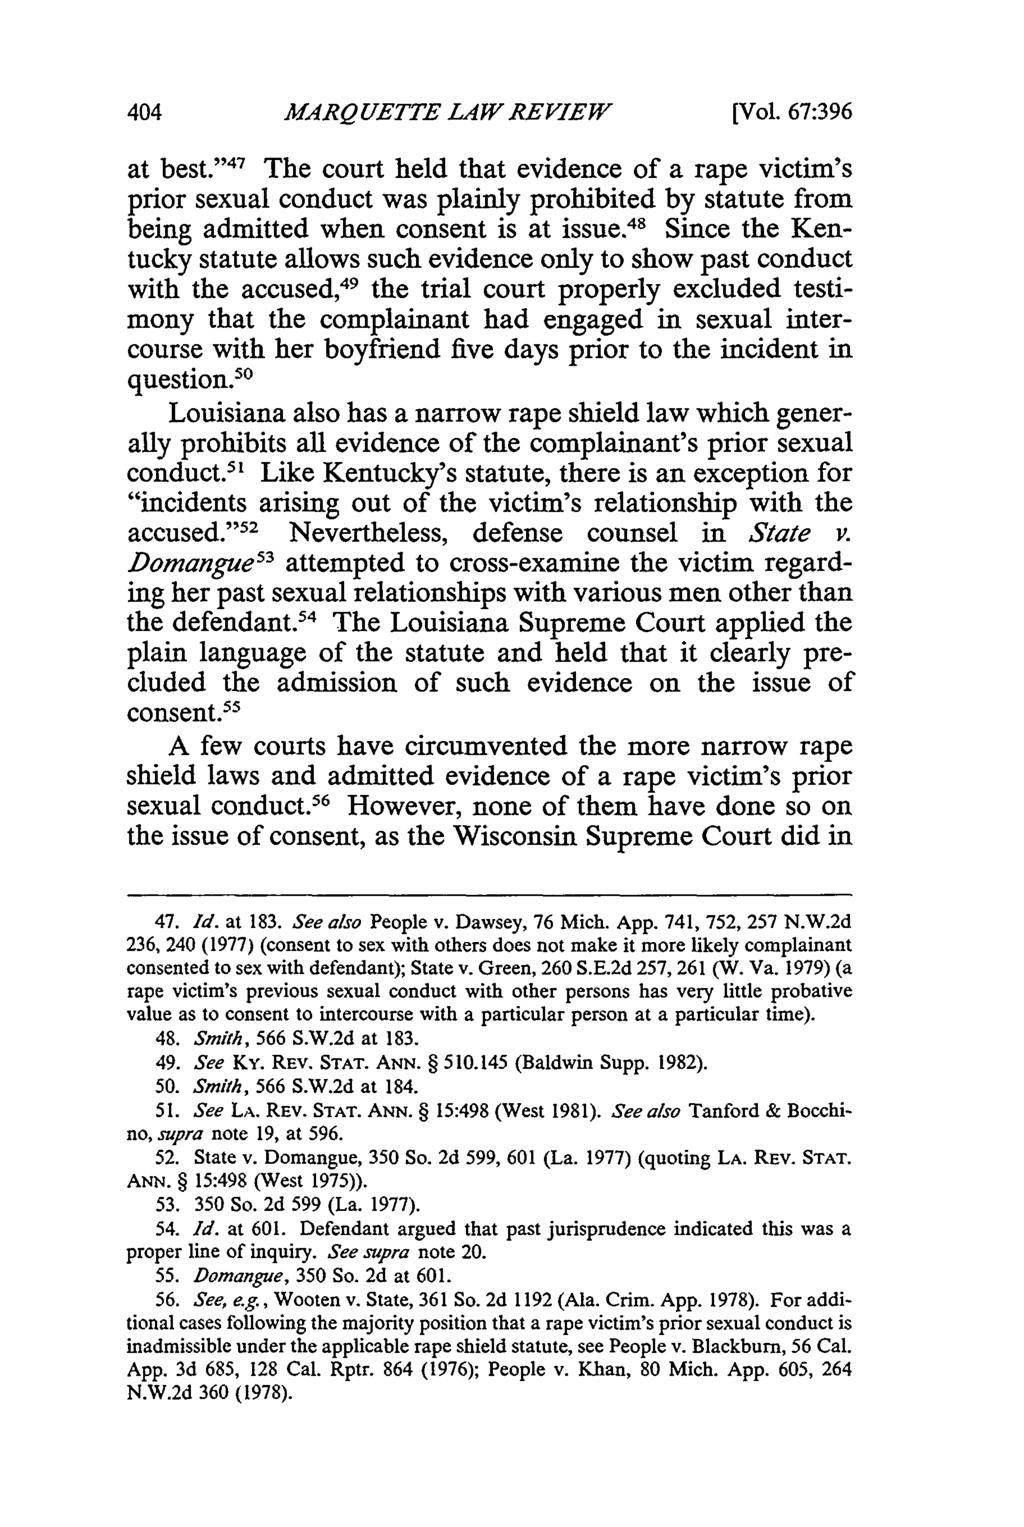 MARQ UETTE LA4W REVIEW [Vol. 67:396 at best. '47 The court held that evidence of a rape victim's prior sexual conduct was plainly prohibited by statute from being admitted when consent is at issue.